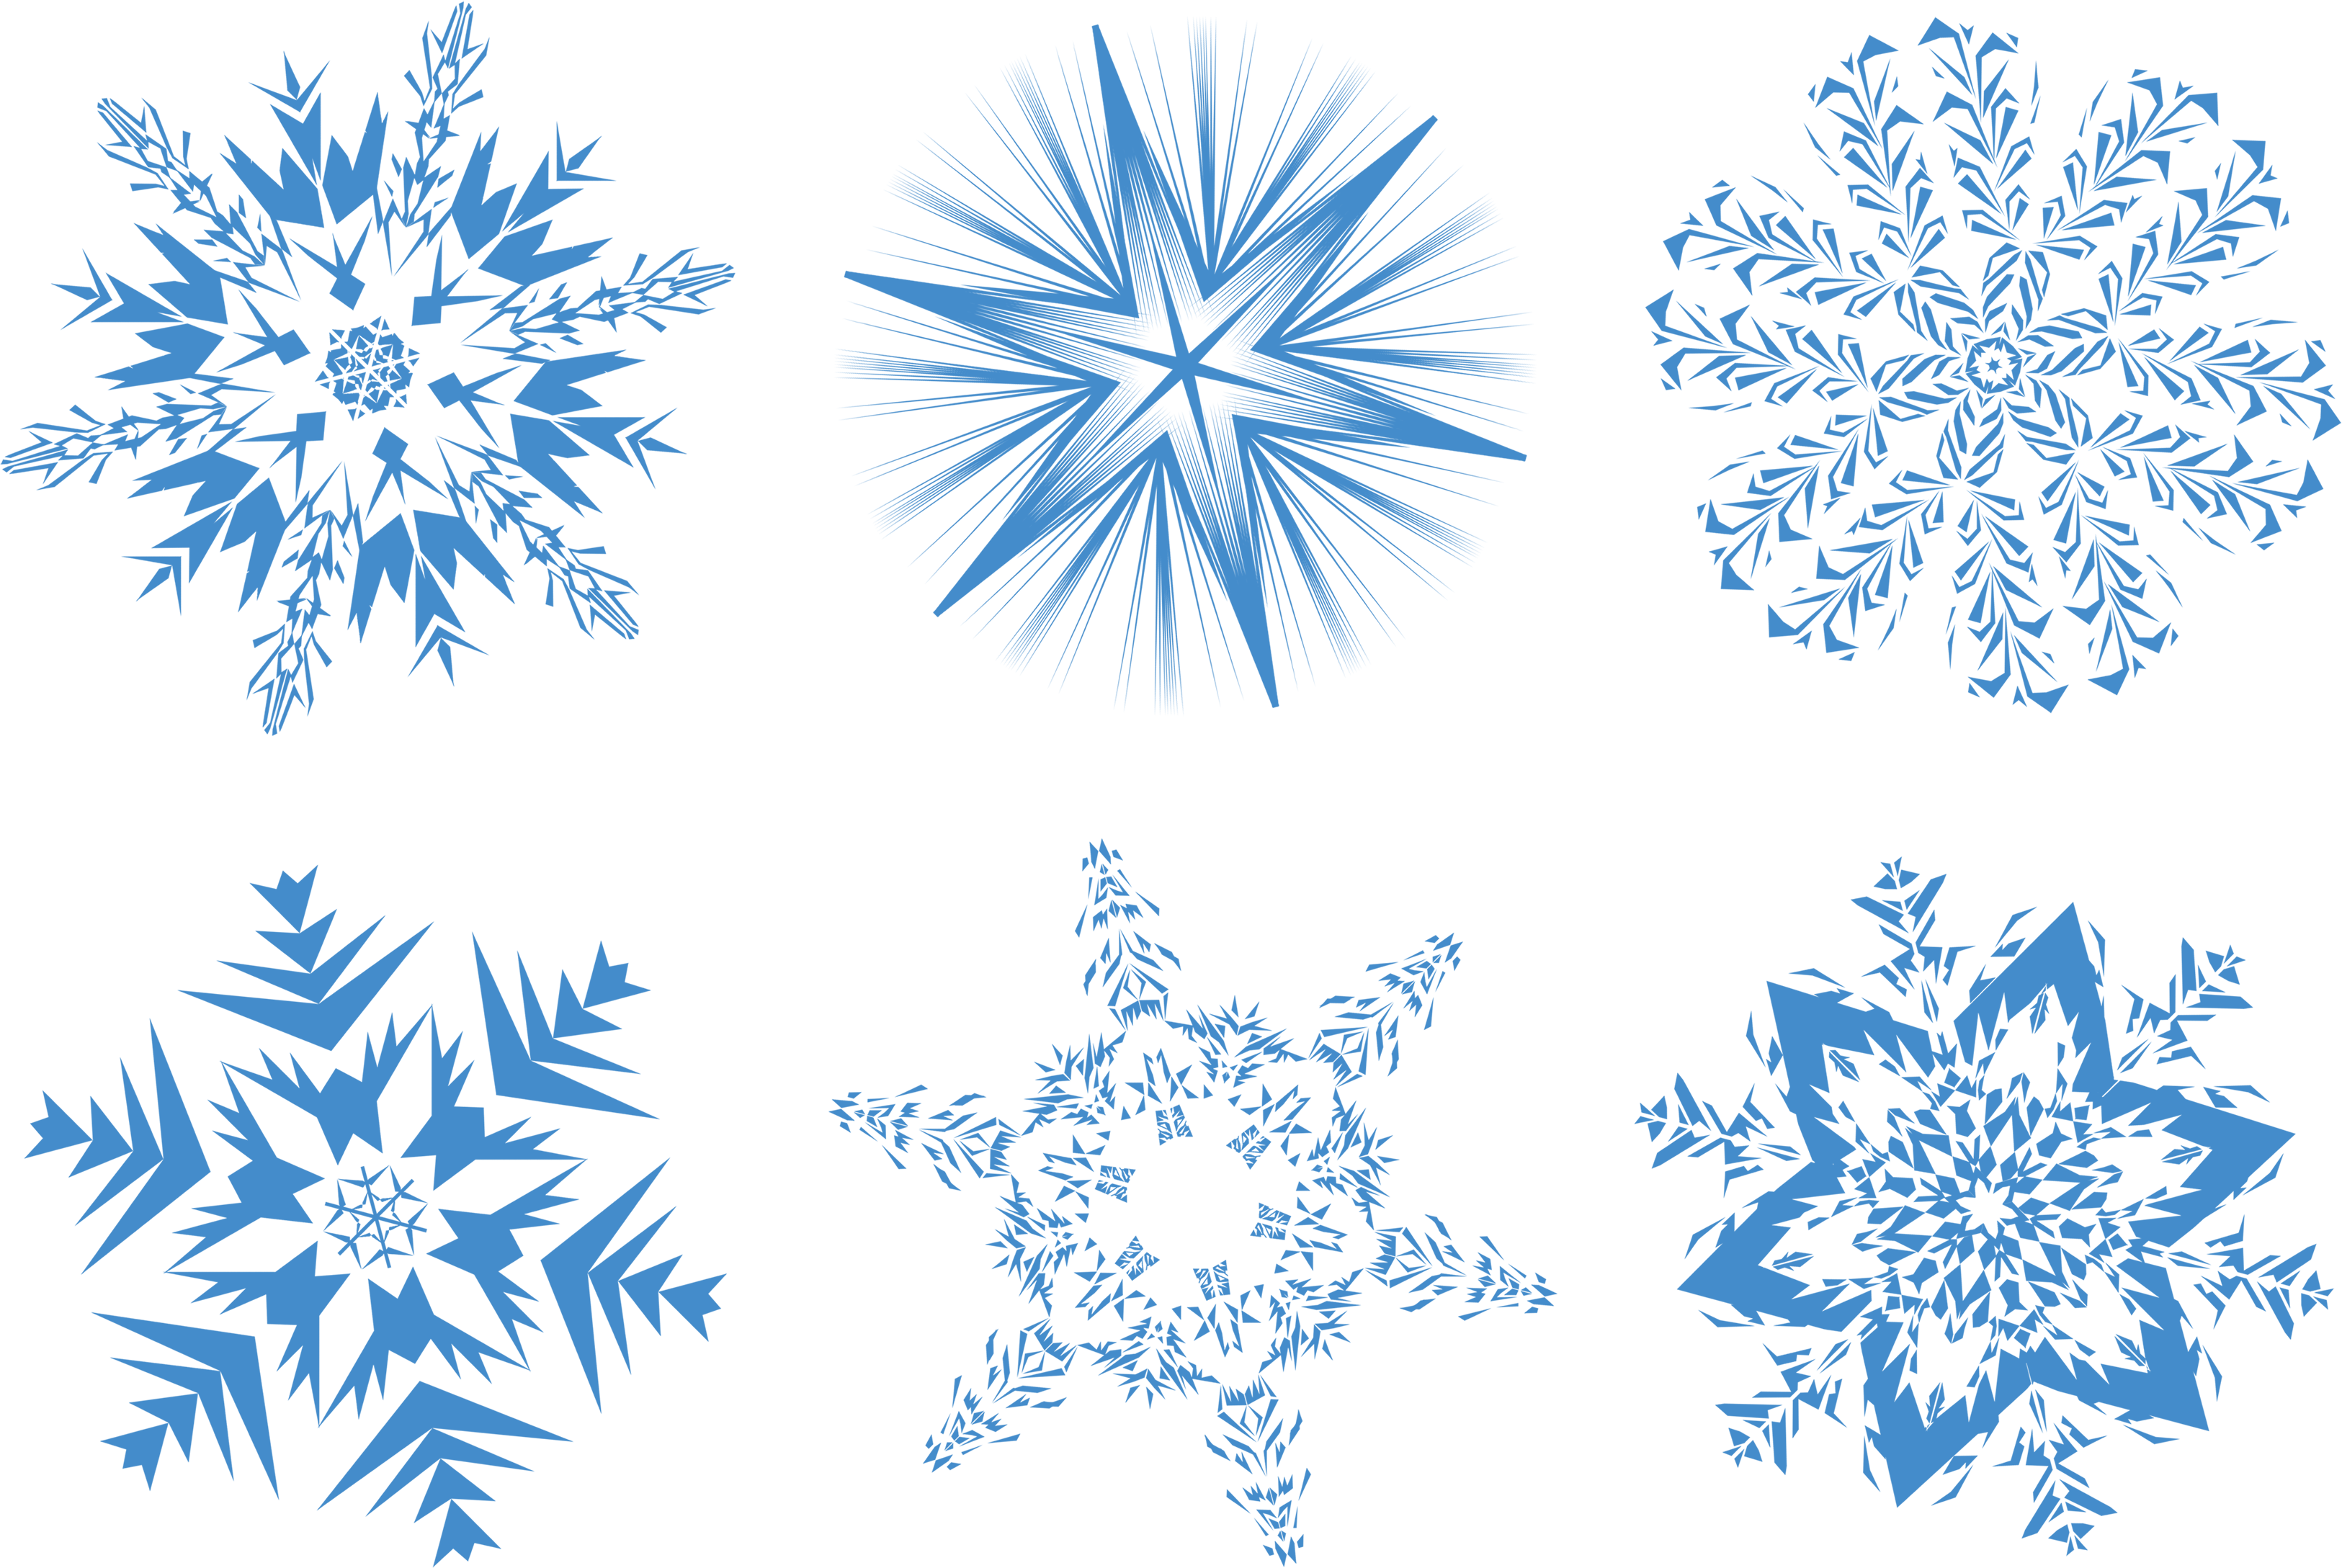 snowflakes background png